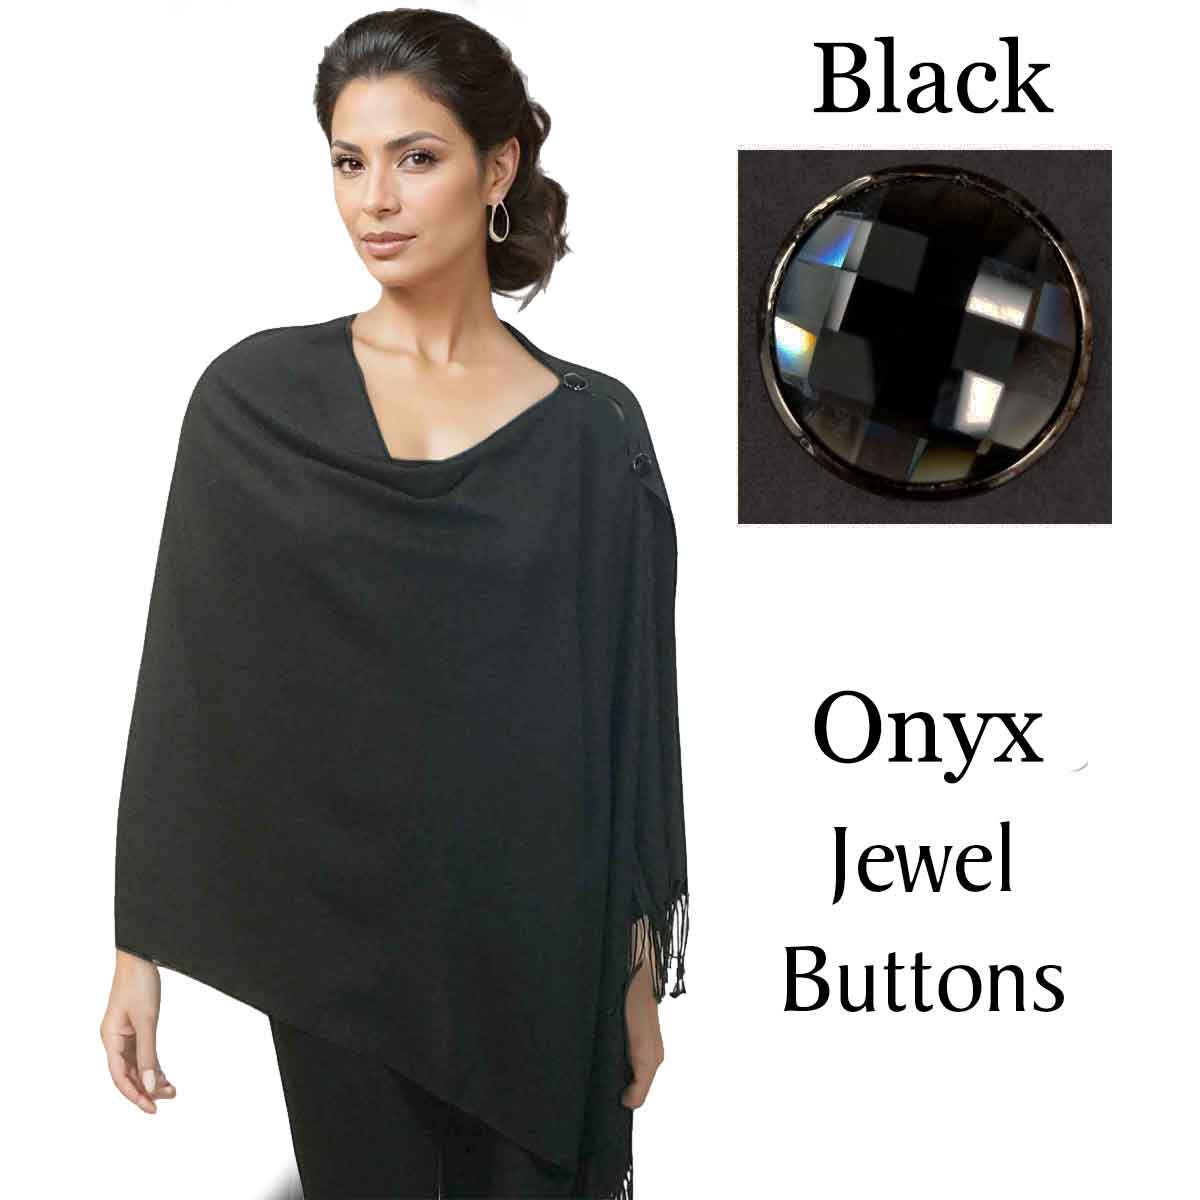 #01 - Black<br> with Onyx Jewel Buttons